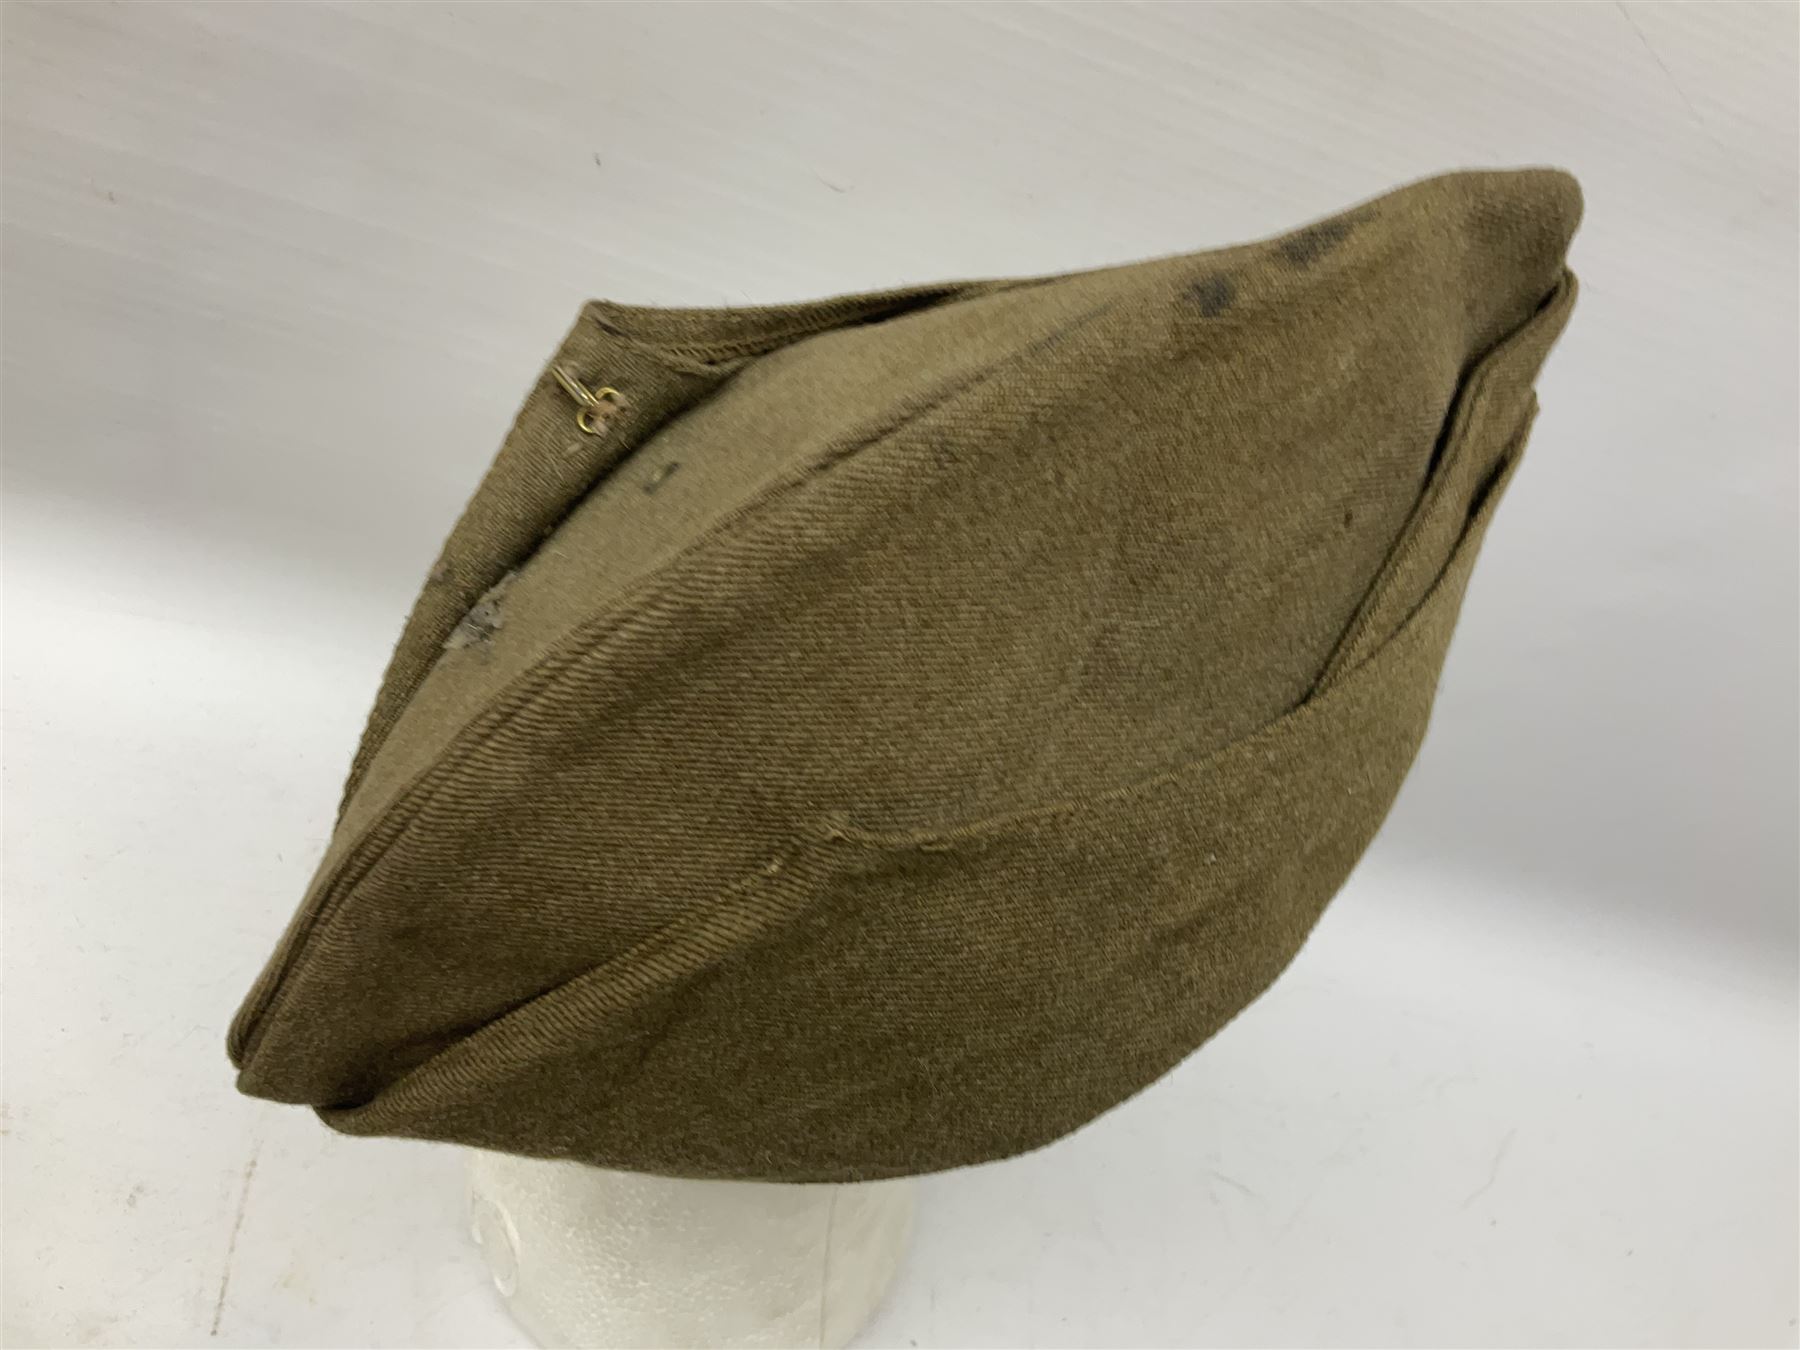 WW2 East Yorkshire Regiment side cap with badge; and quantity of WW2 British Army webbing and leathe - Image 4 of 15